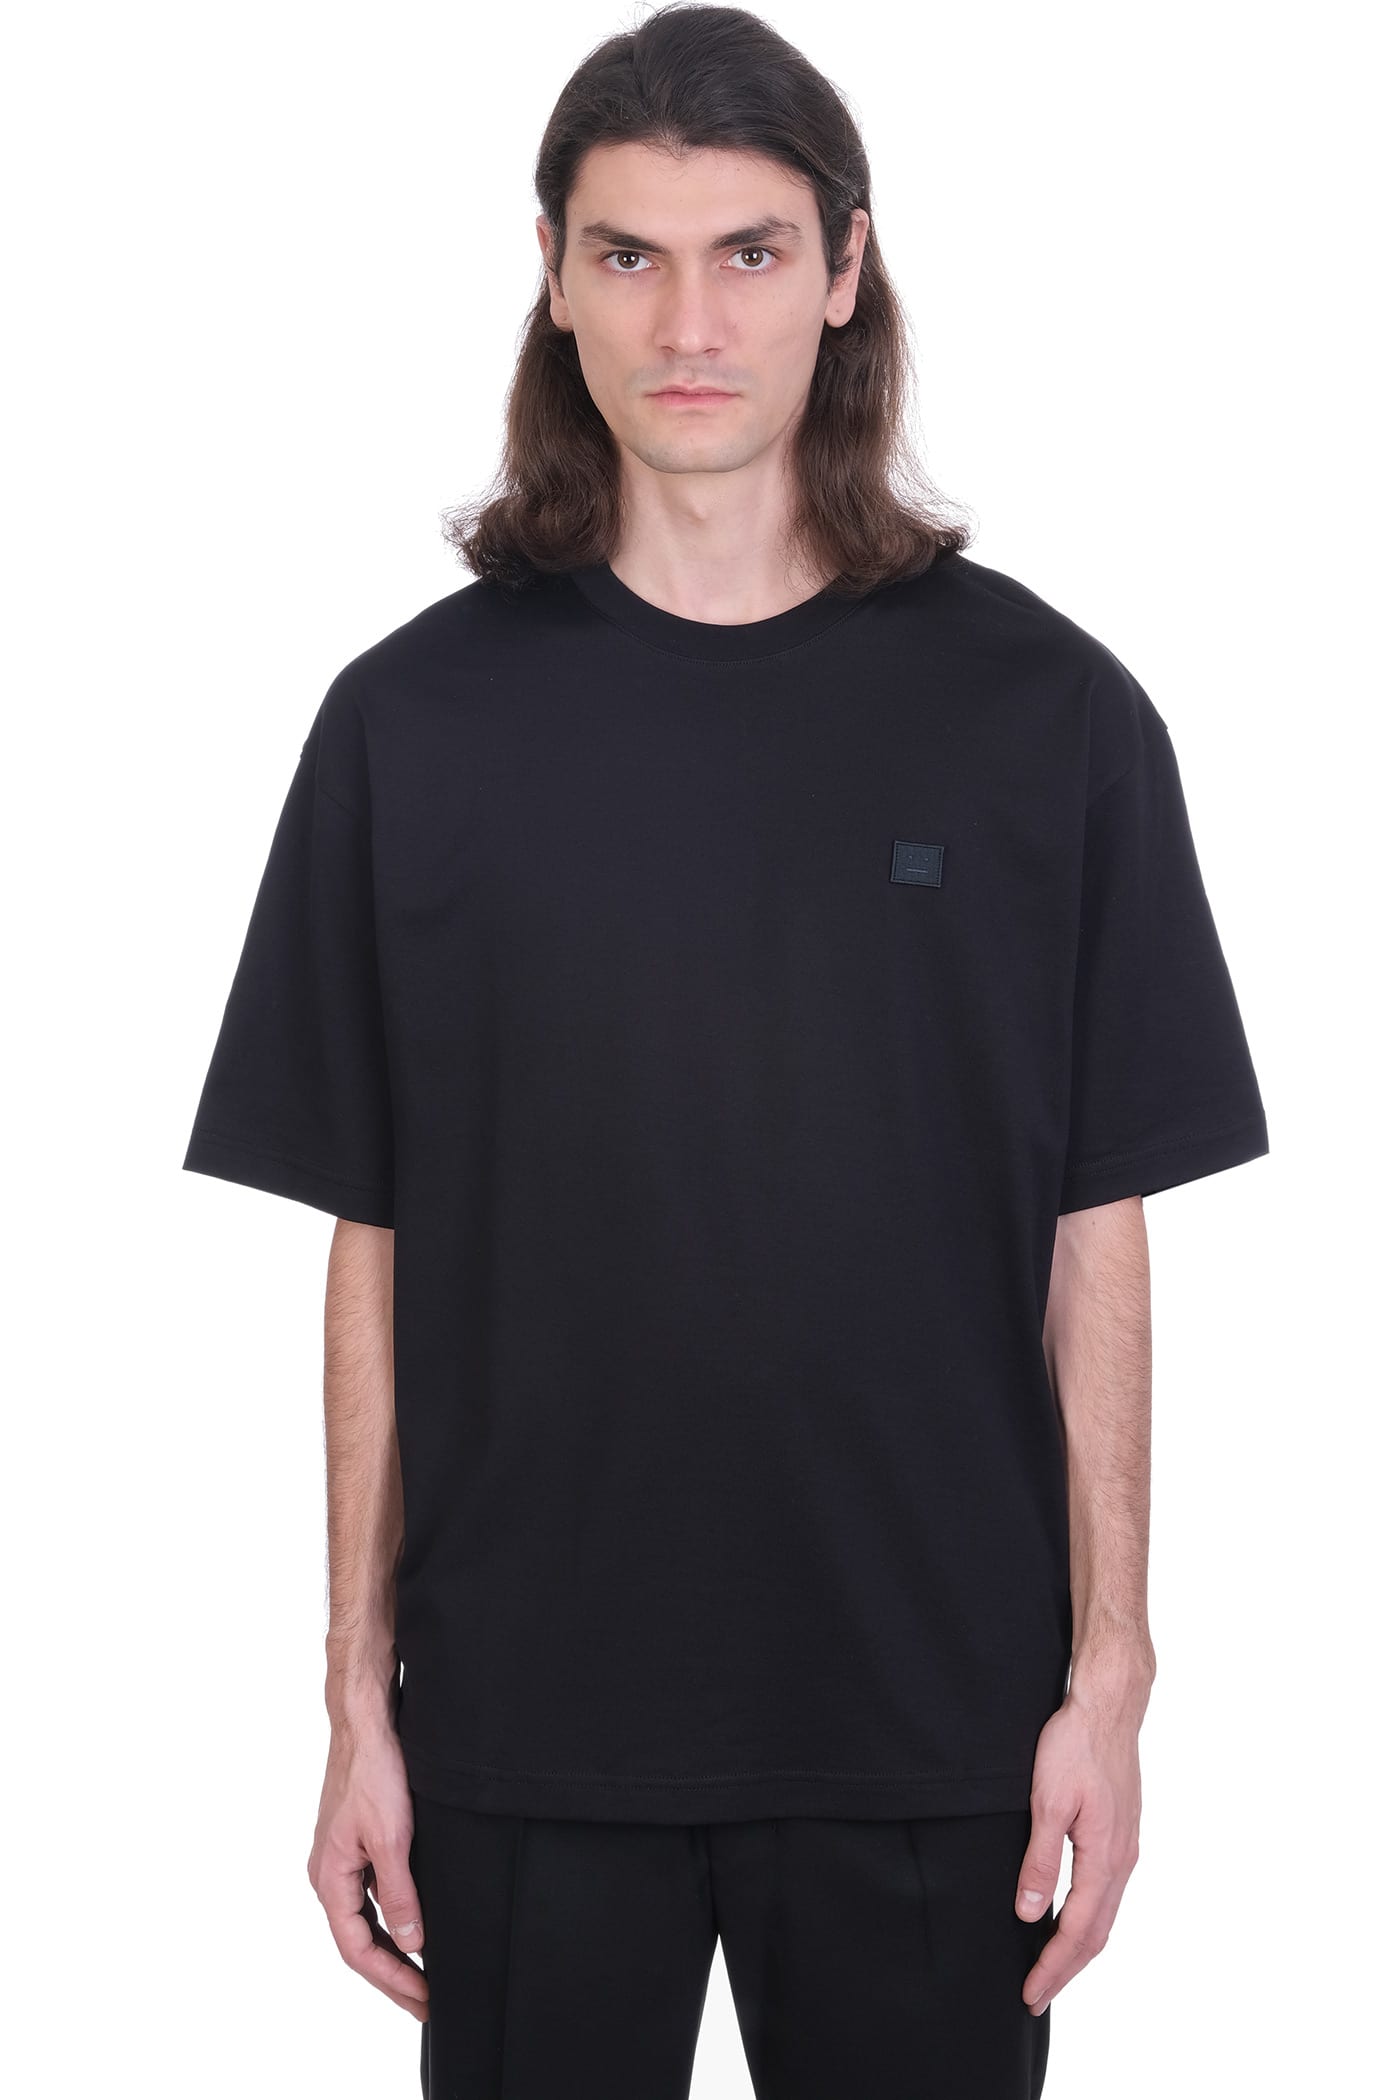 Acne Studios Exford Face T-shirt In Black Cotton